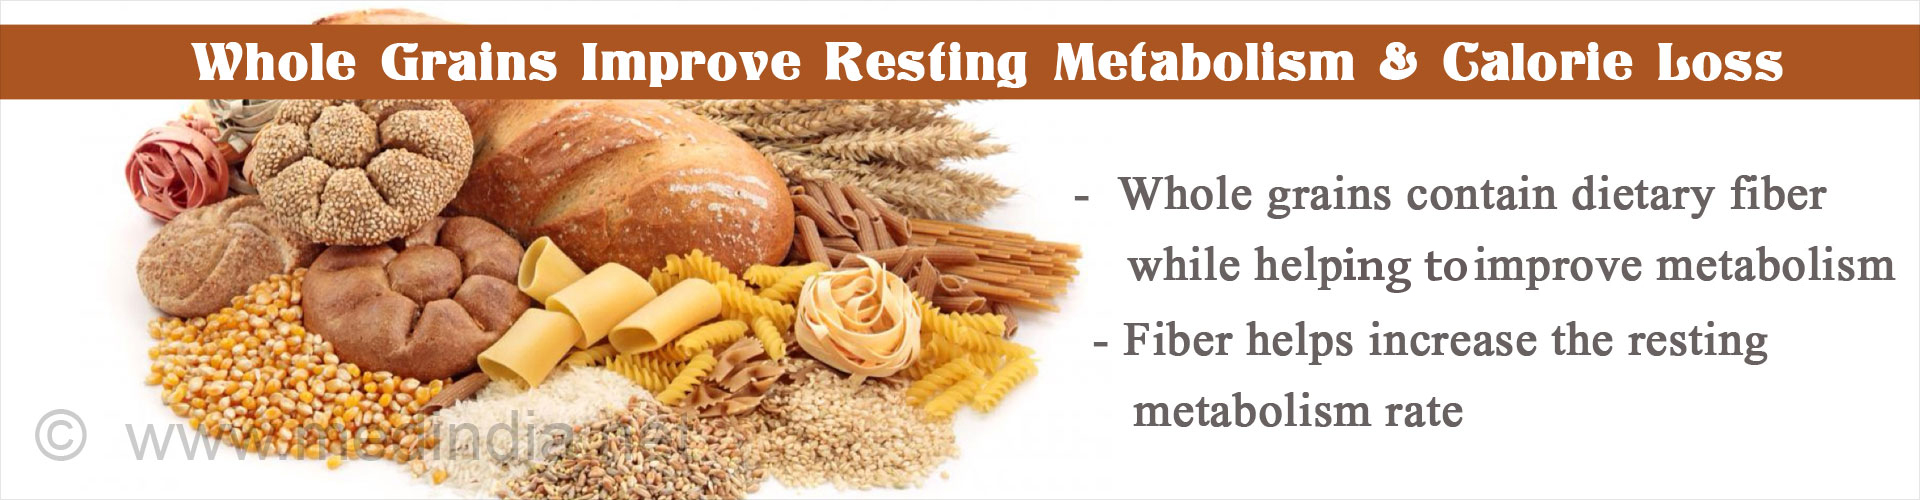 Whole grains improves resting metabolism and calorie loss
- Whole grains contain dietary fiber
- Fiber helps increase the resting and metabolism rate